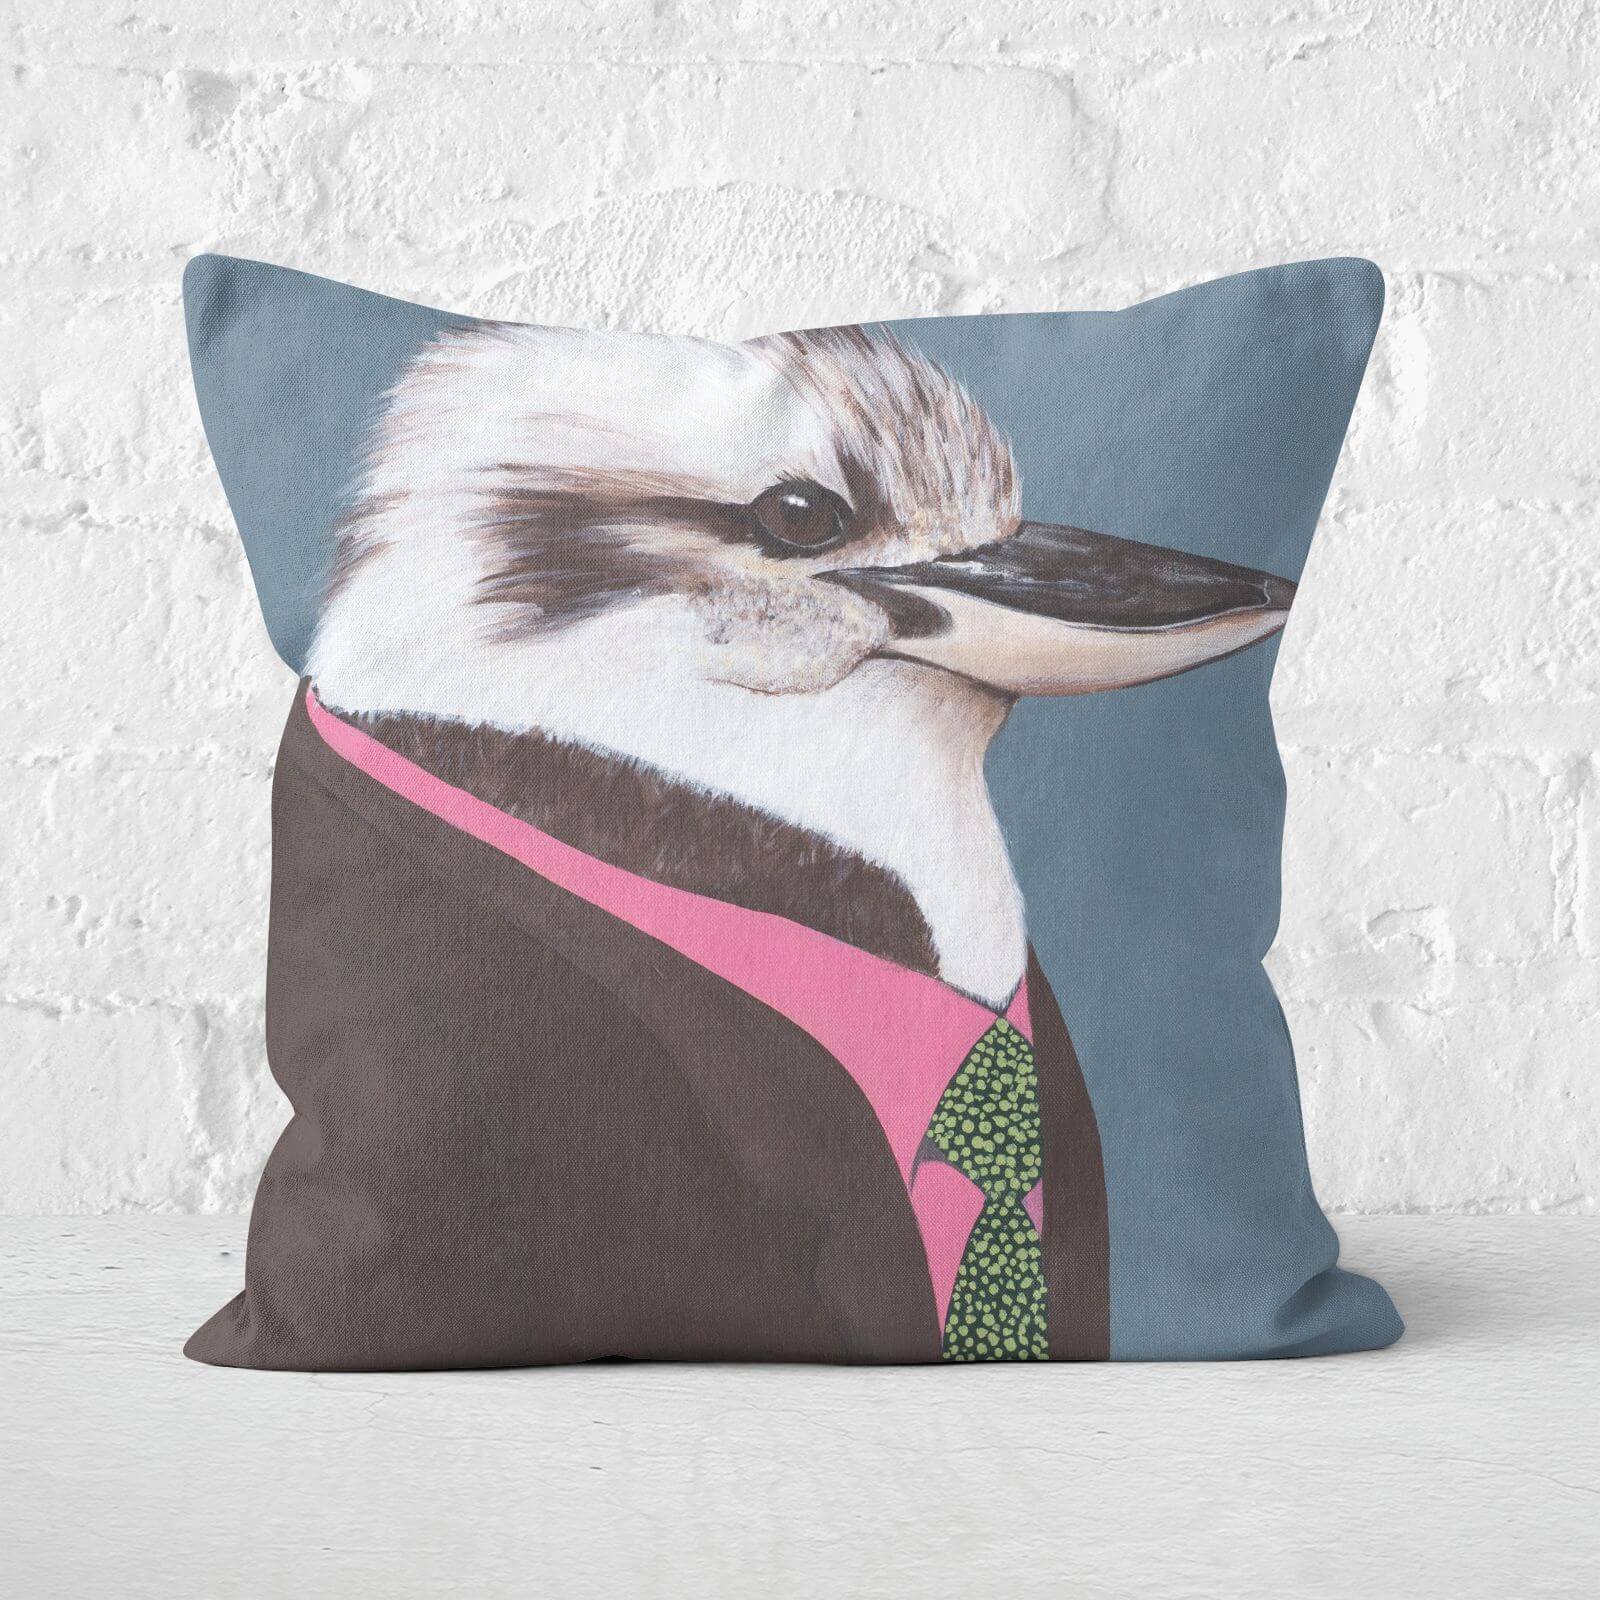 Kookaburra In Suit Square Cushion - 40x40cm - Soft Touch